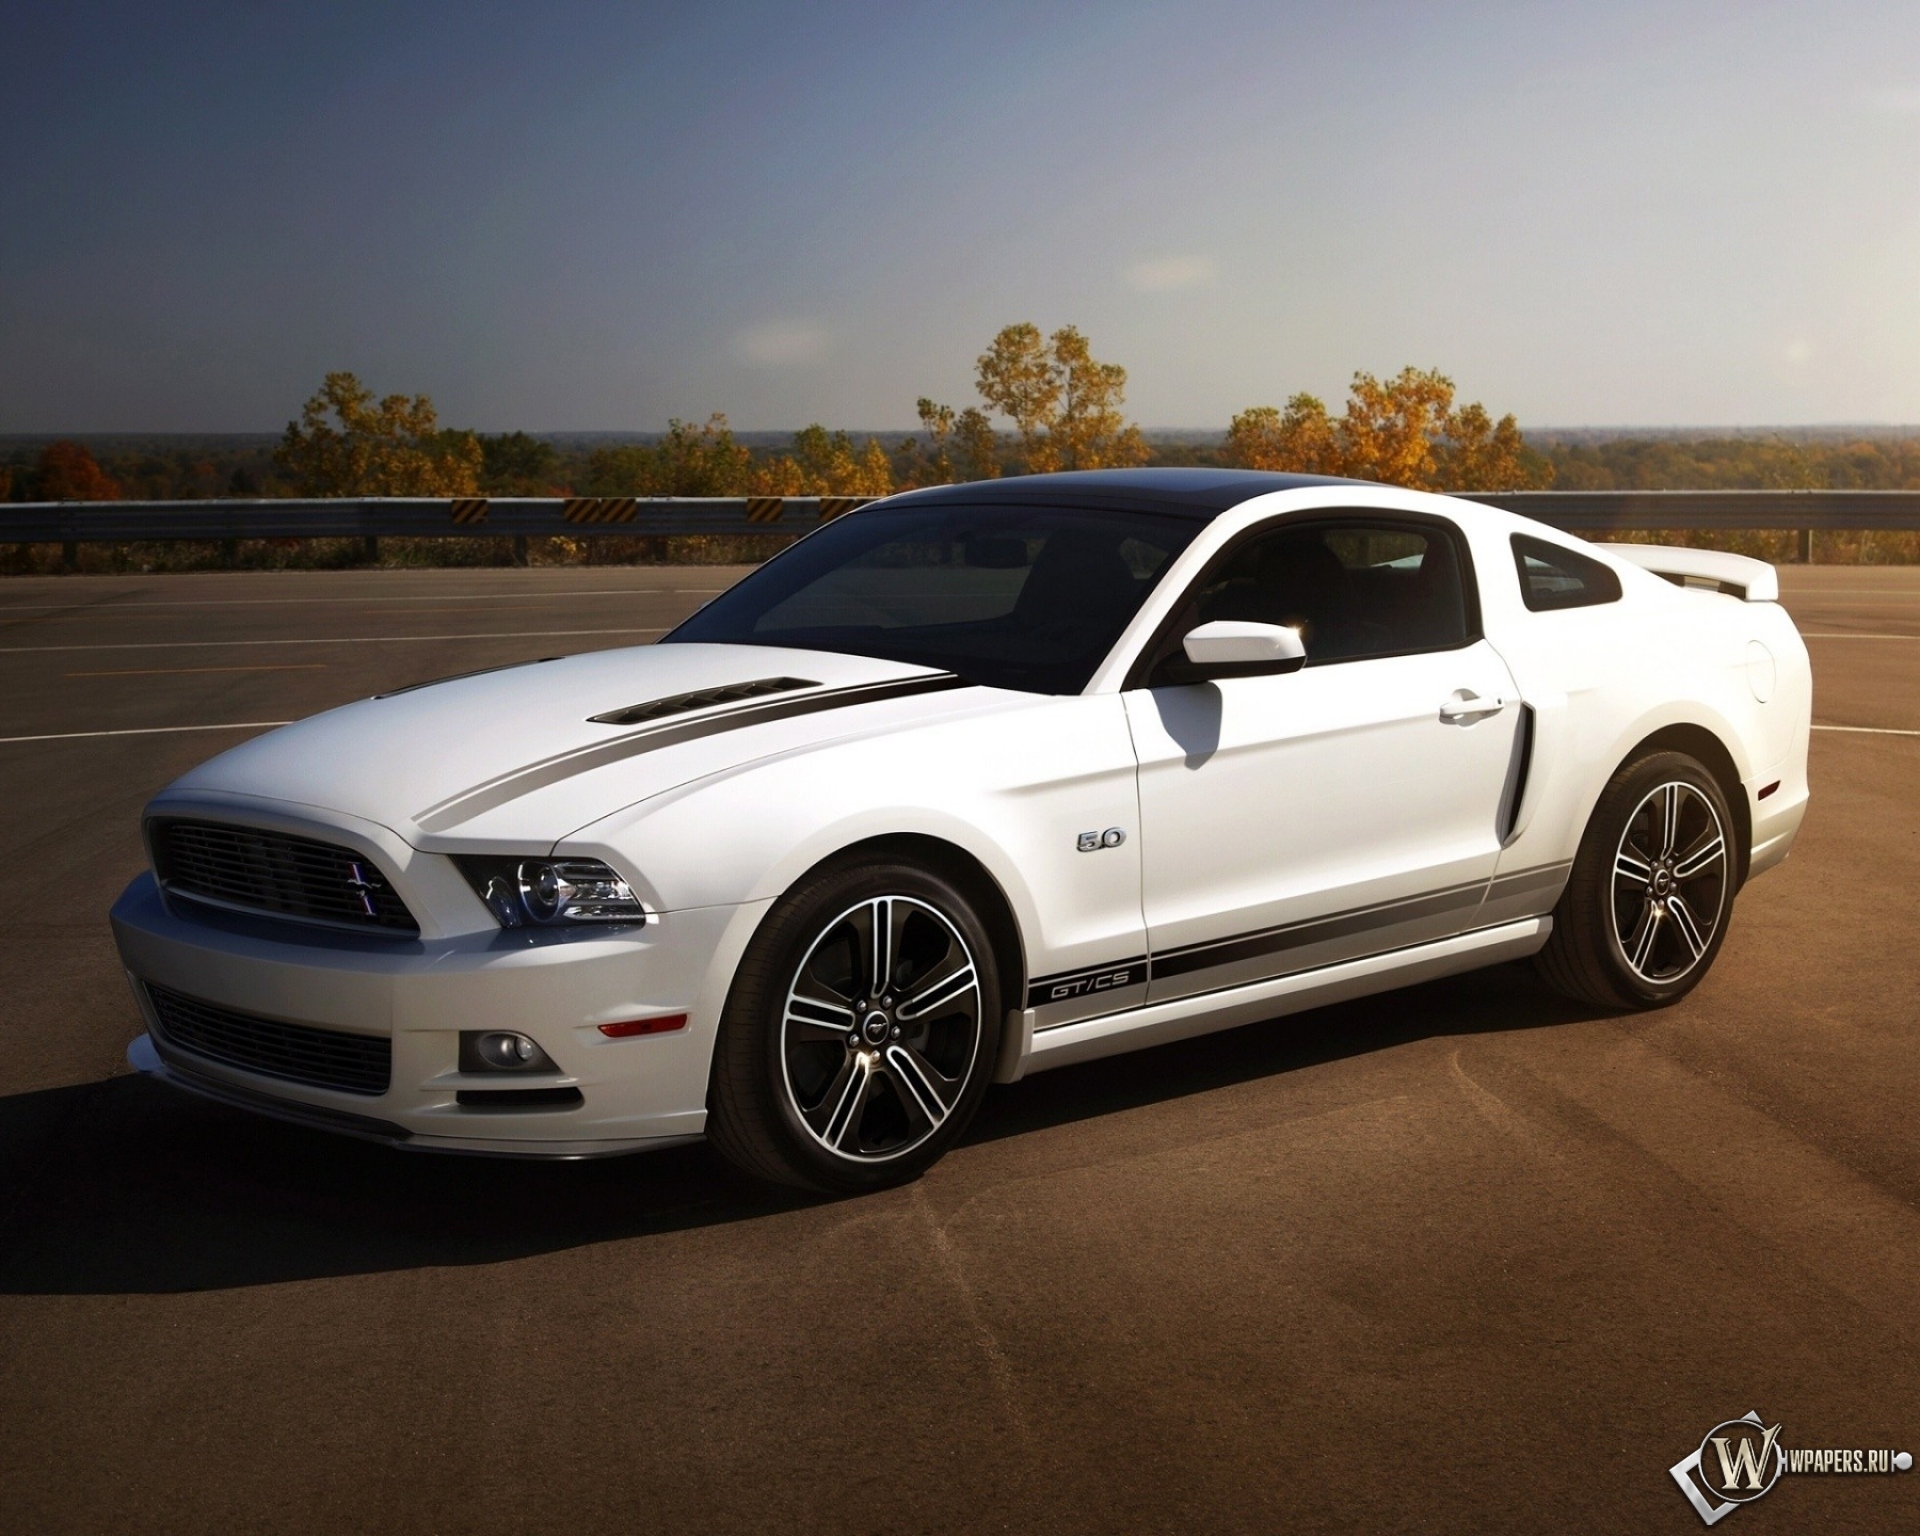 Ford Mustang V8 5.0 1920x1536